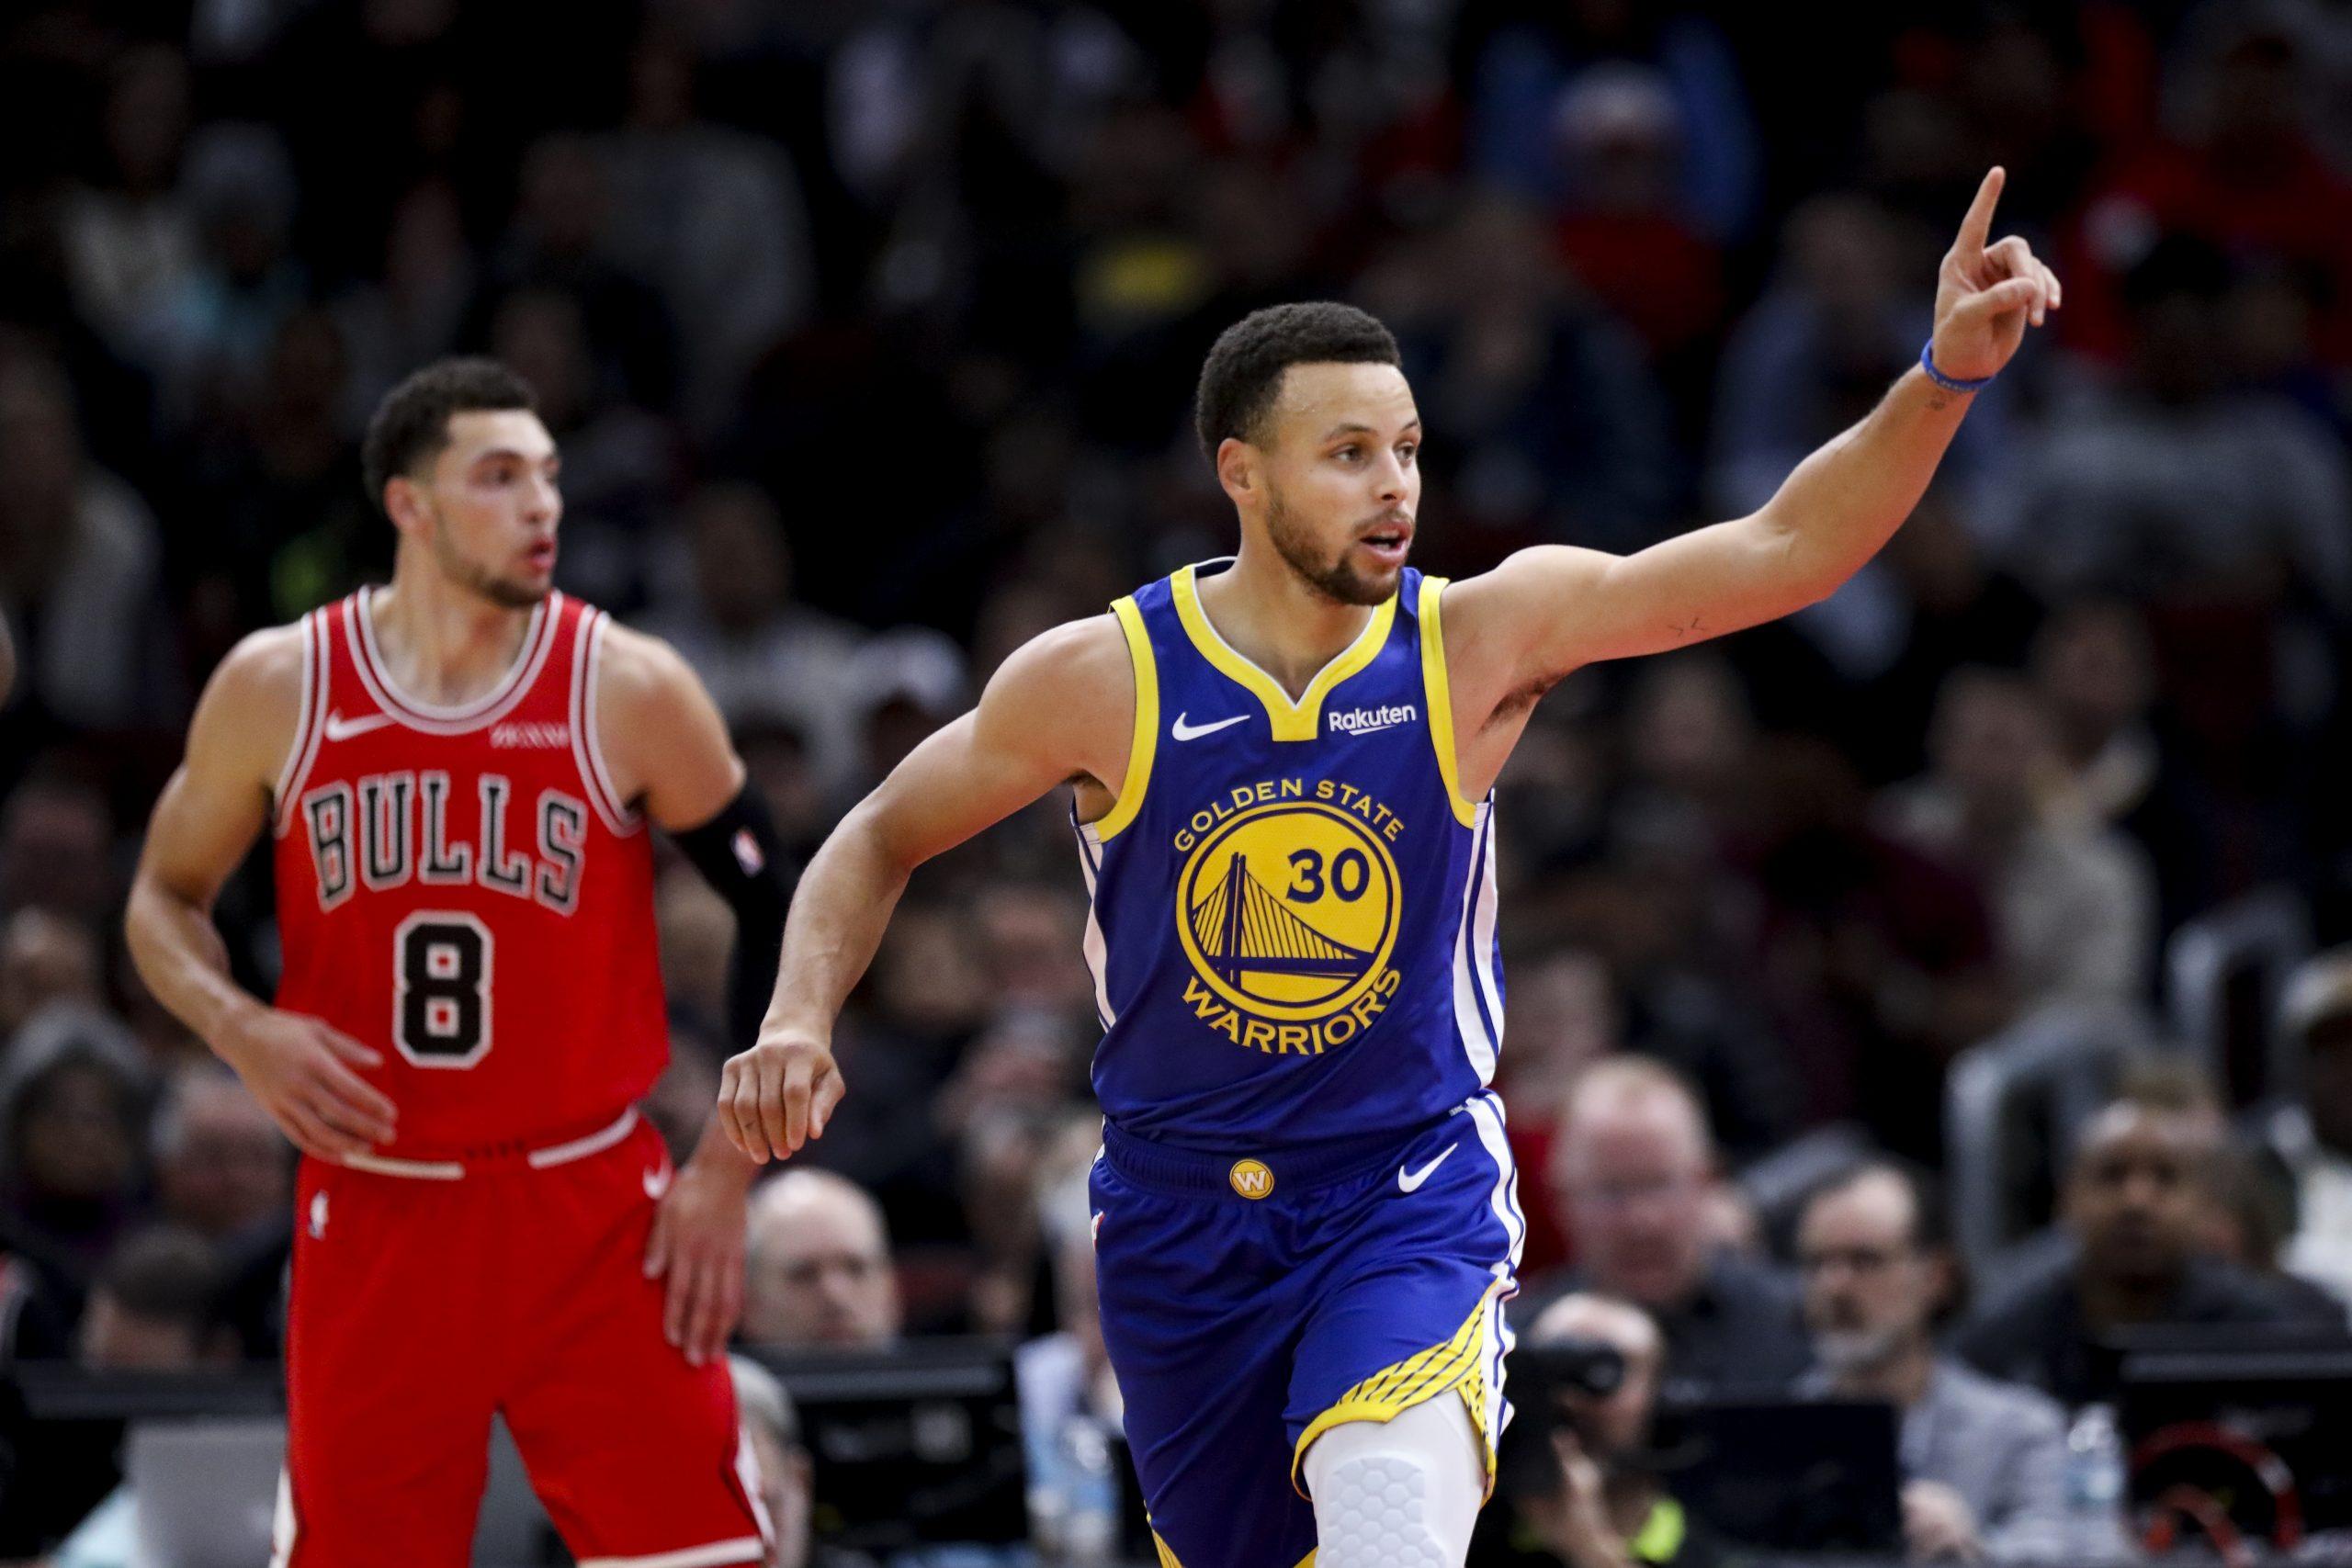 Golden State Warriors guard Stephen Curry (30) puts his finger up after making a shot during the first half against the Chicago Bulls at the United Center Monday Oct. 29, 2018, in Chicago. (Armando L. Sanchez/Chicago Tribune/TNS)